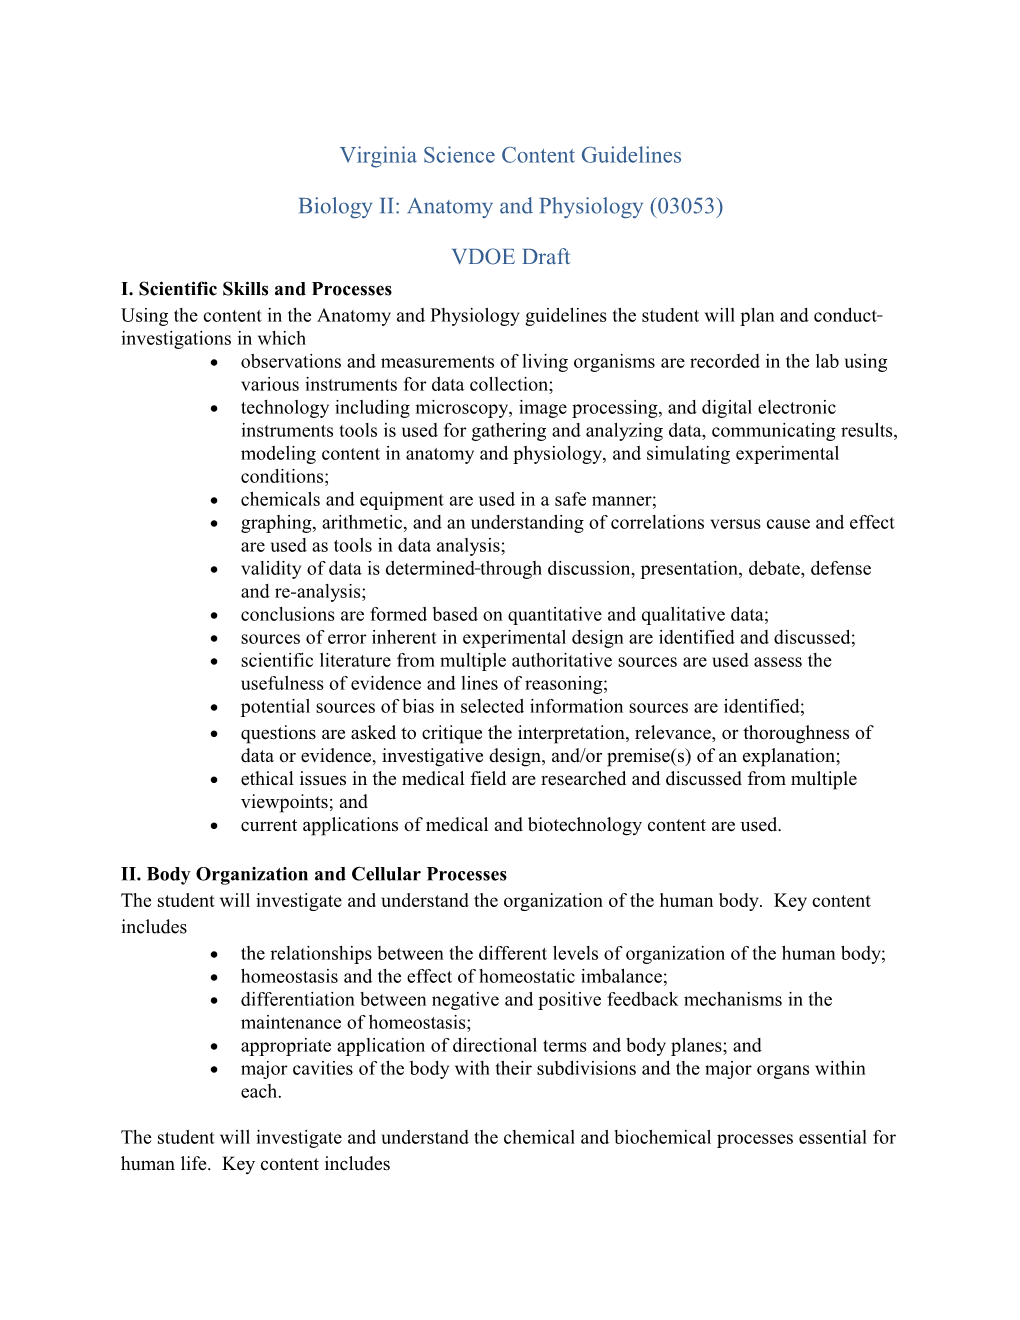 Virginia Science Content Guidelines: Bioloigy II Anatomy and Physiology